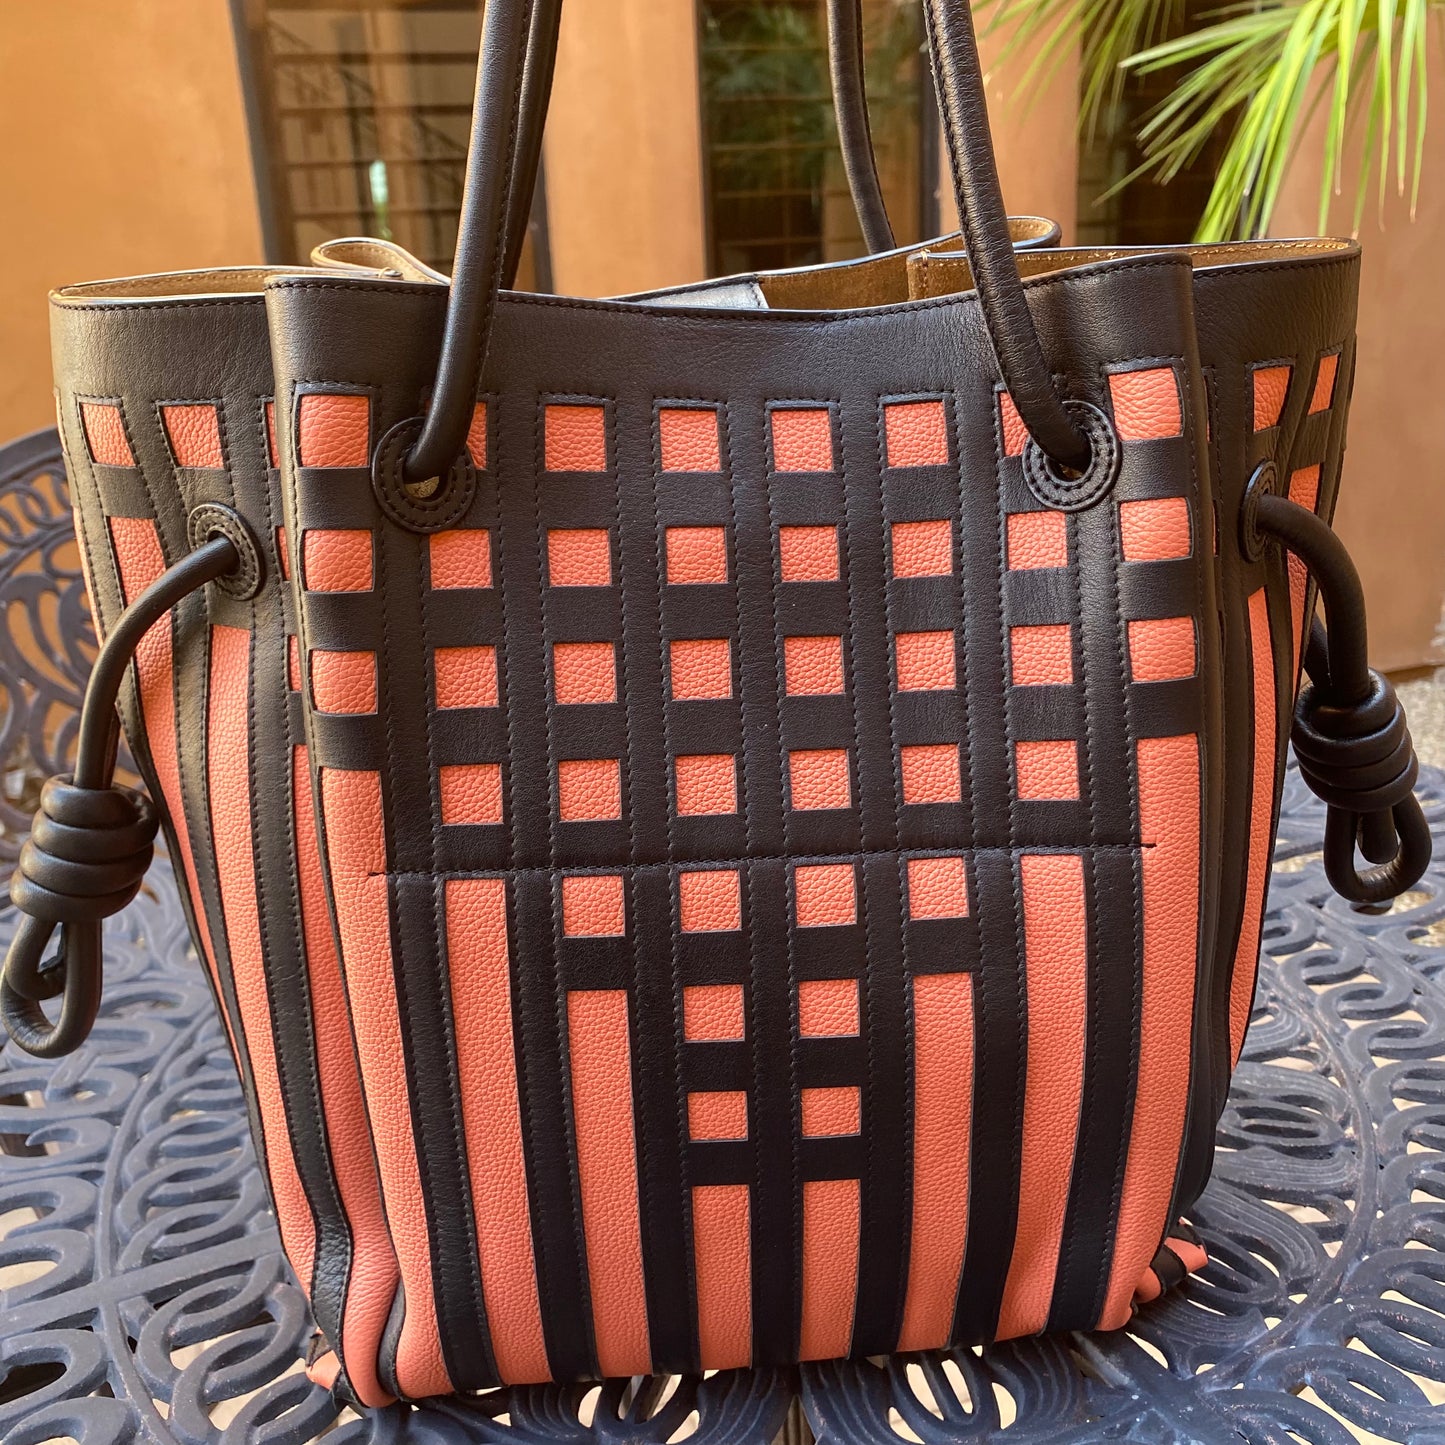 Loewe Flamenco Knot Artists Collection Tote